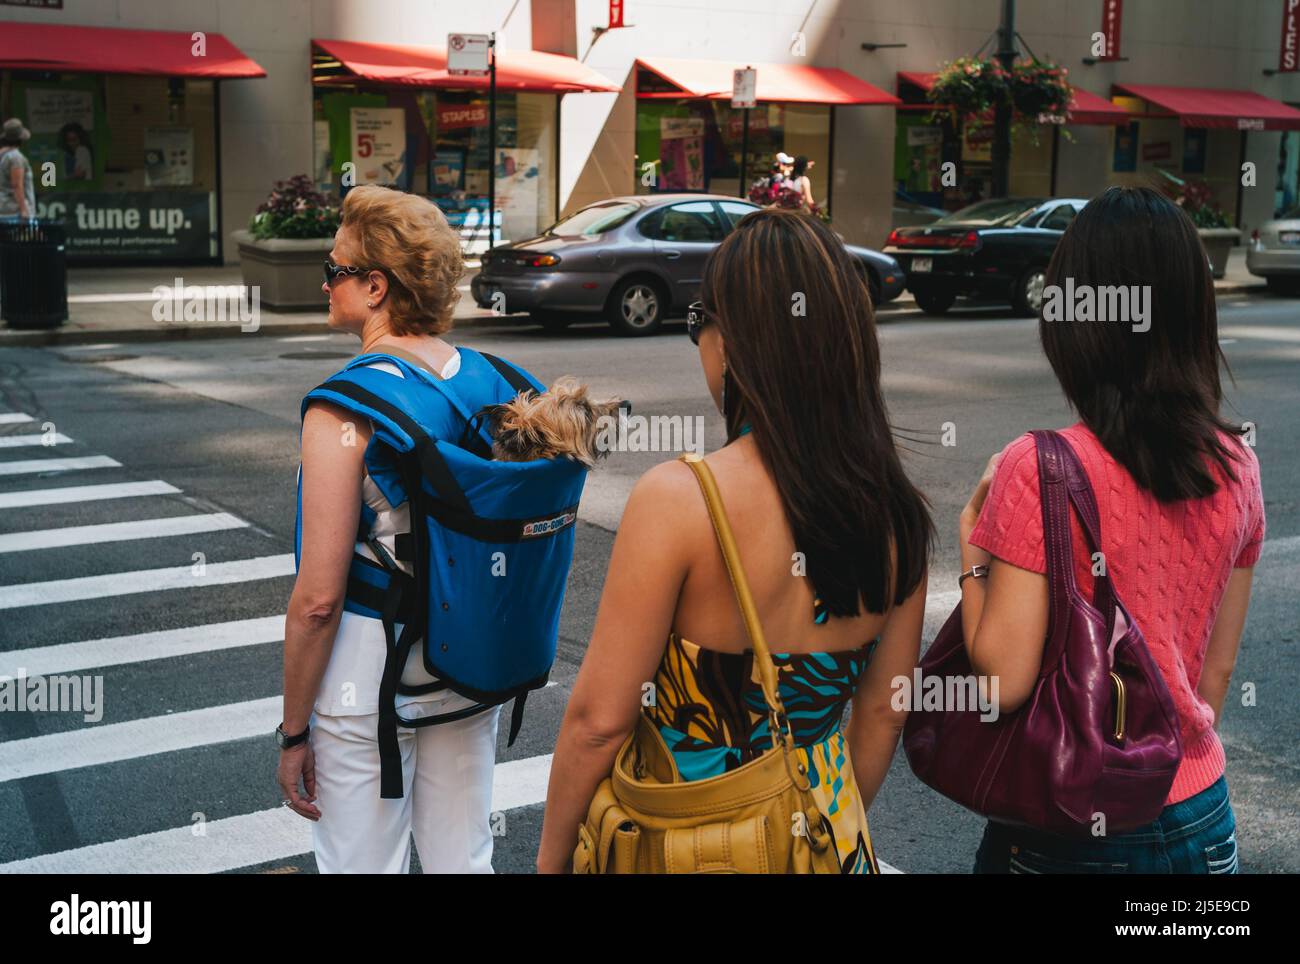 Chicago, Illinois, United States - July 25 2009: Woman Carrying a Dog in a Dog-Gone Device Pet Carrier Backpack or Raucksack. Stock Photo